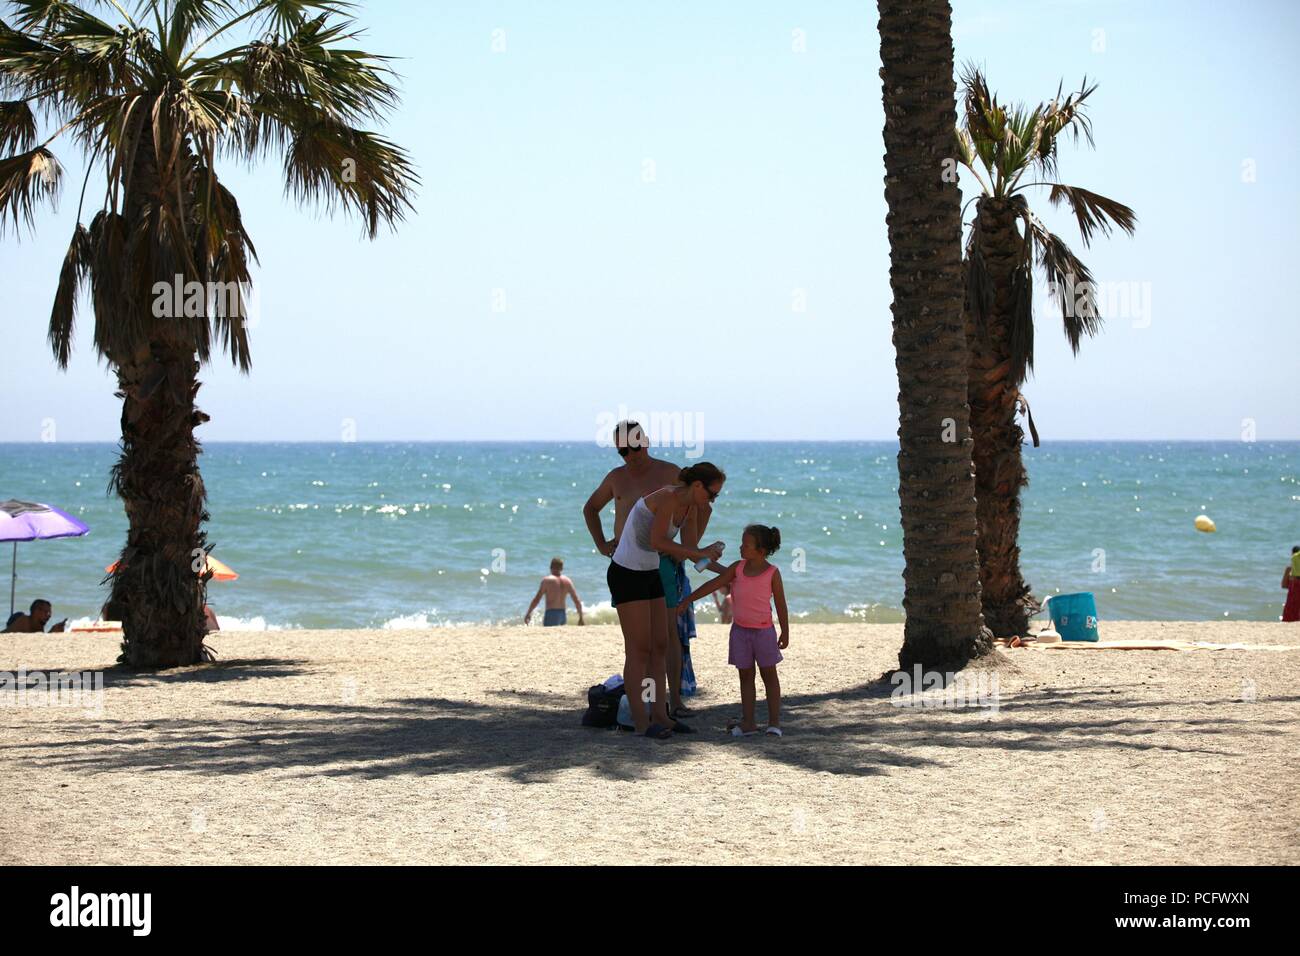 Roquetas de Mar, Almeria, Spain. 2nd Aug, 2018. The heatwave that is hitting Spain is expected to exceed 43Â°C in some parts of the country. Roquetas de Mar is a small tourist town west of the capital city of Almeria, famed for its Moorish castle. A family stands under the shade of a palm tree on the beach with the mediteranian sea in the background. Photo Credit: Paul Lawrenson /Alamy Live News Stock Photo